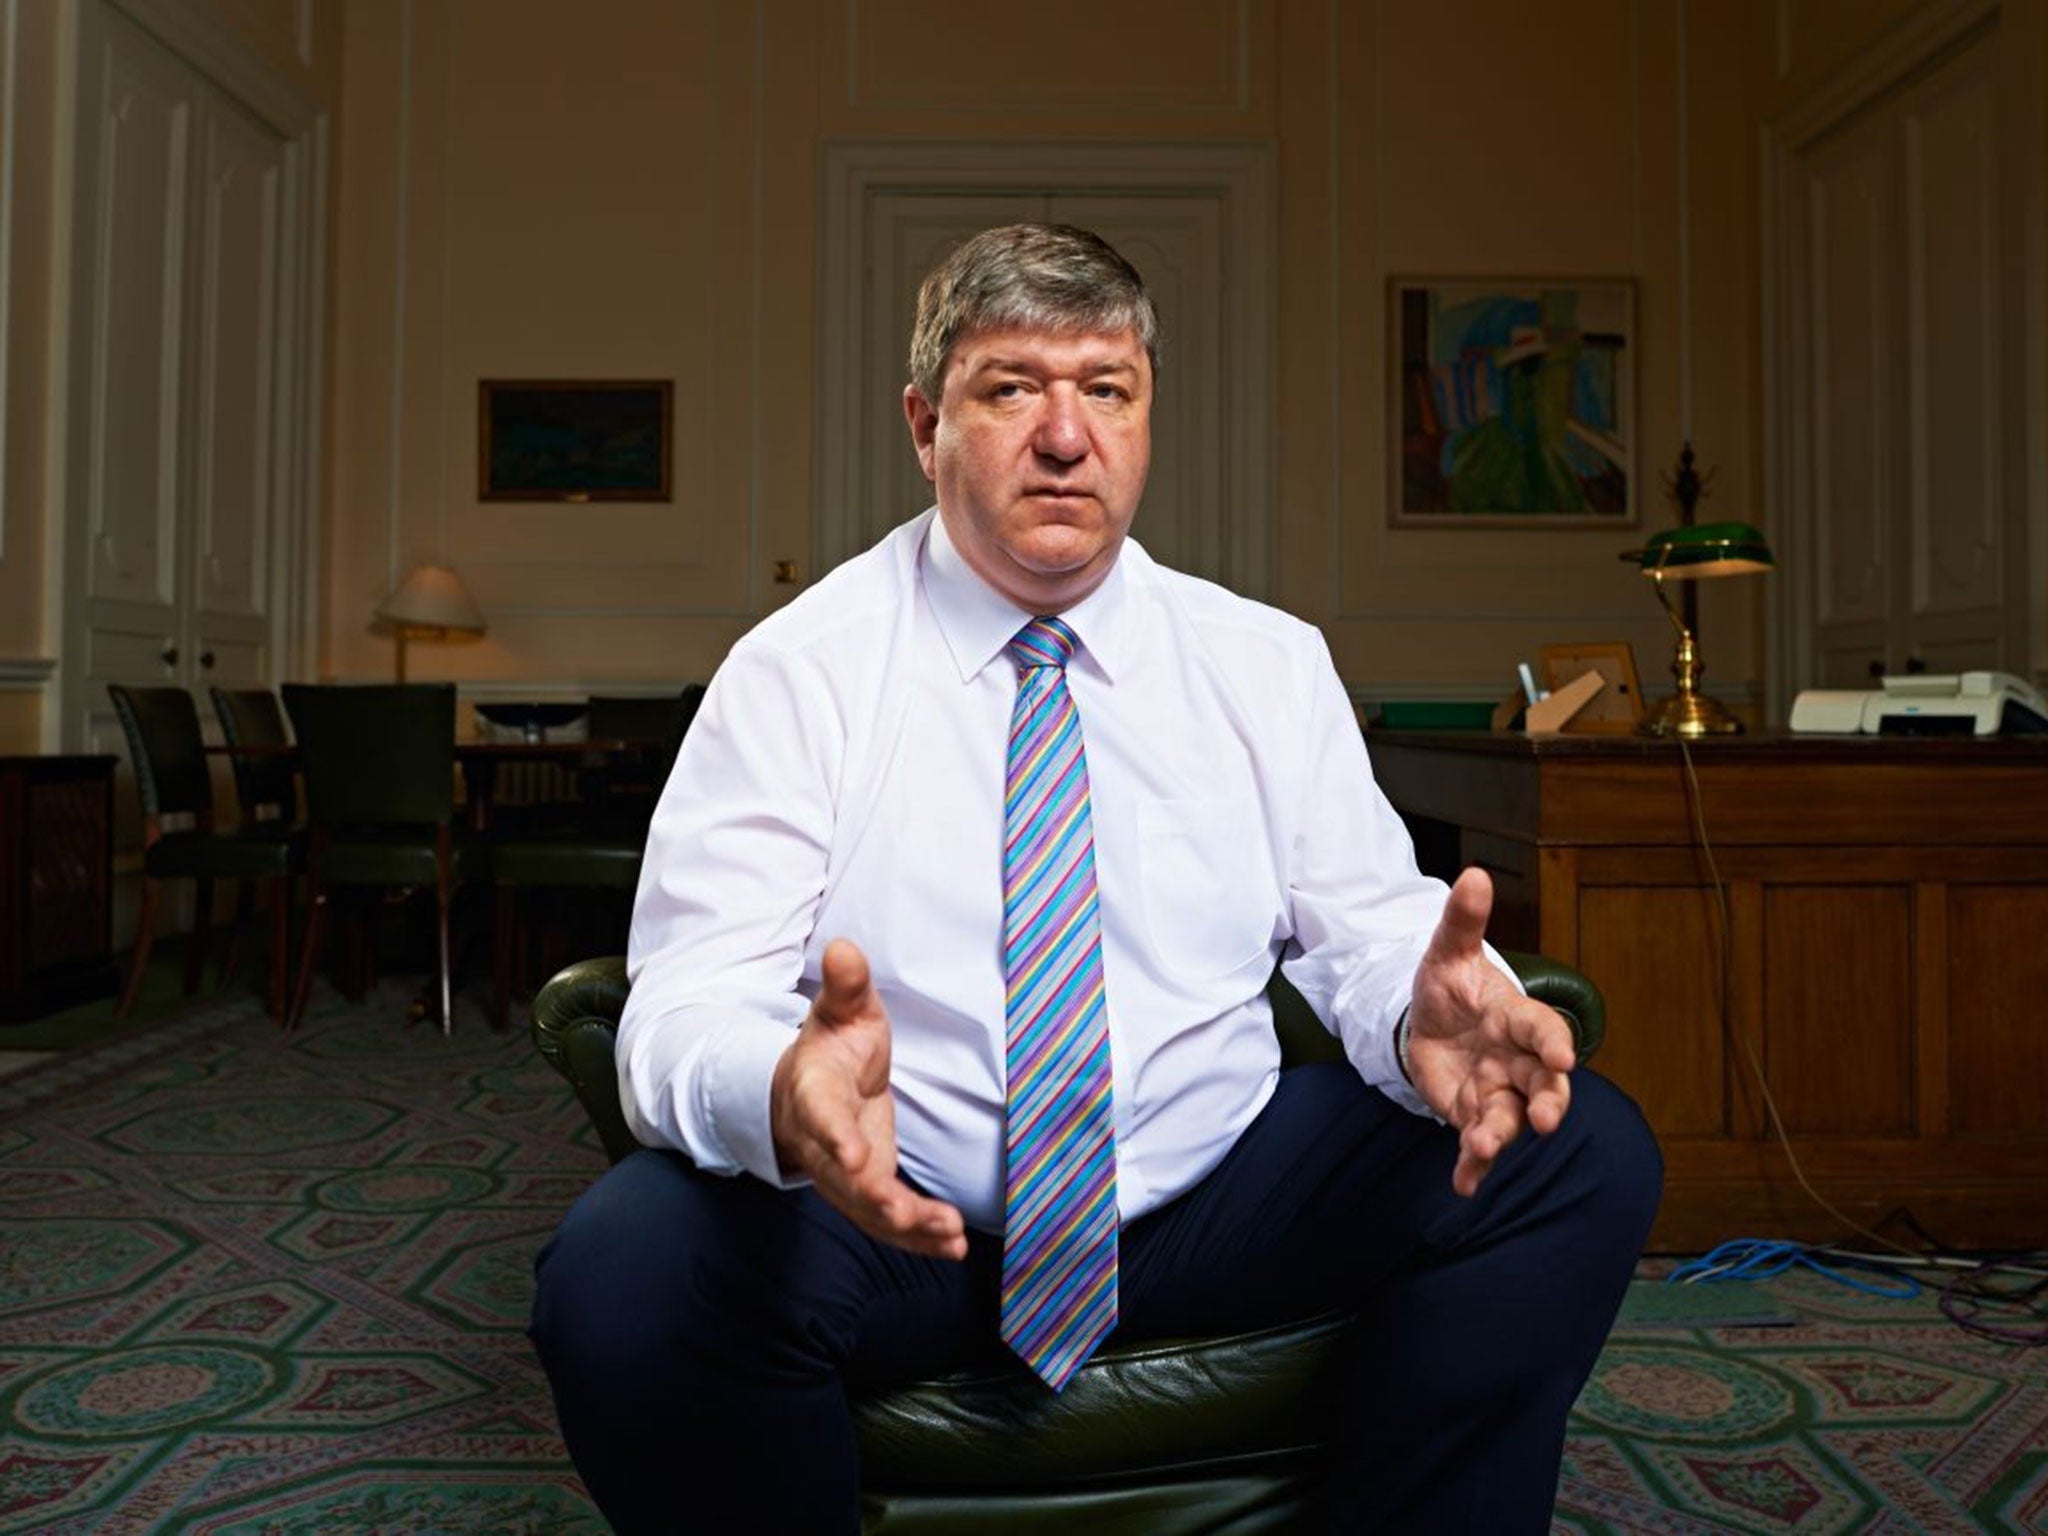 Mr Carmichael was a deputy chief whip in the coalition